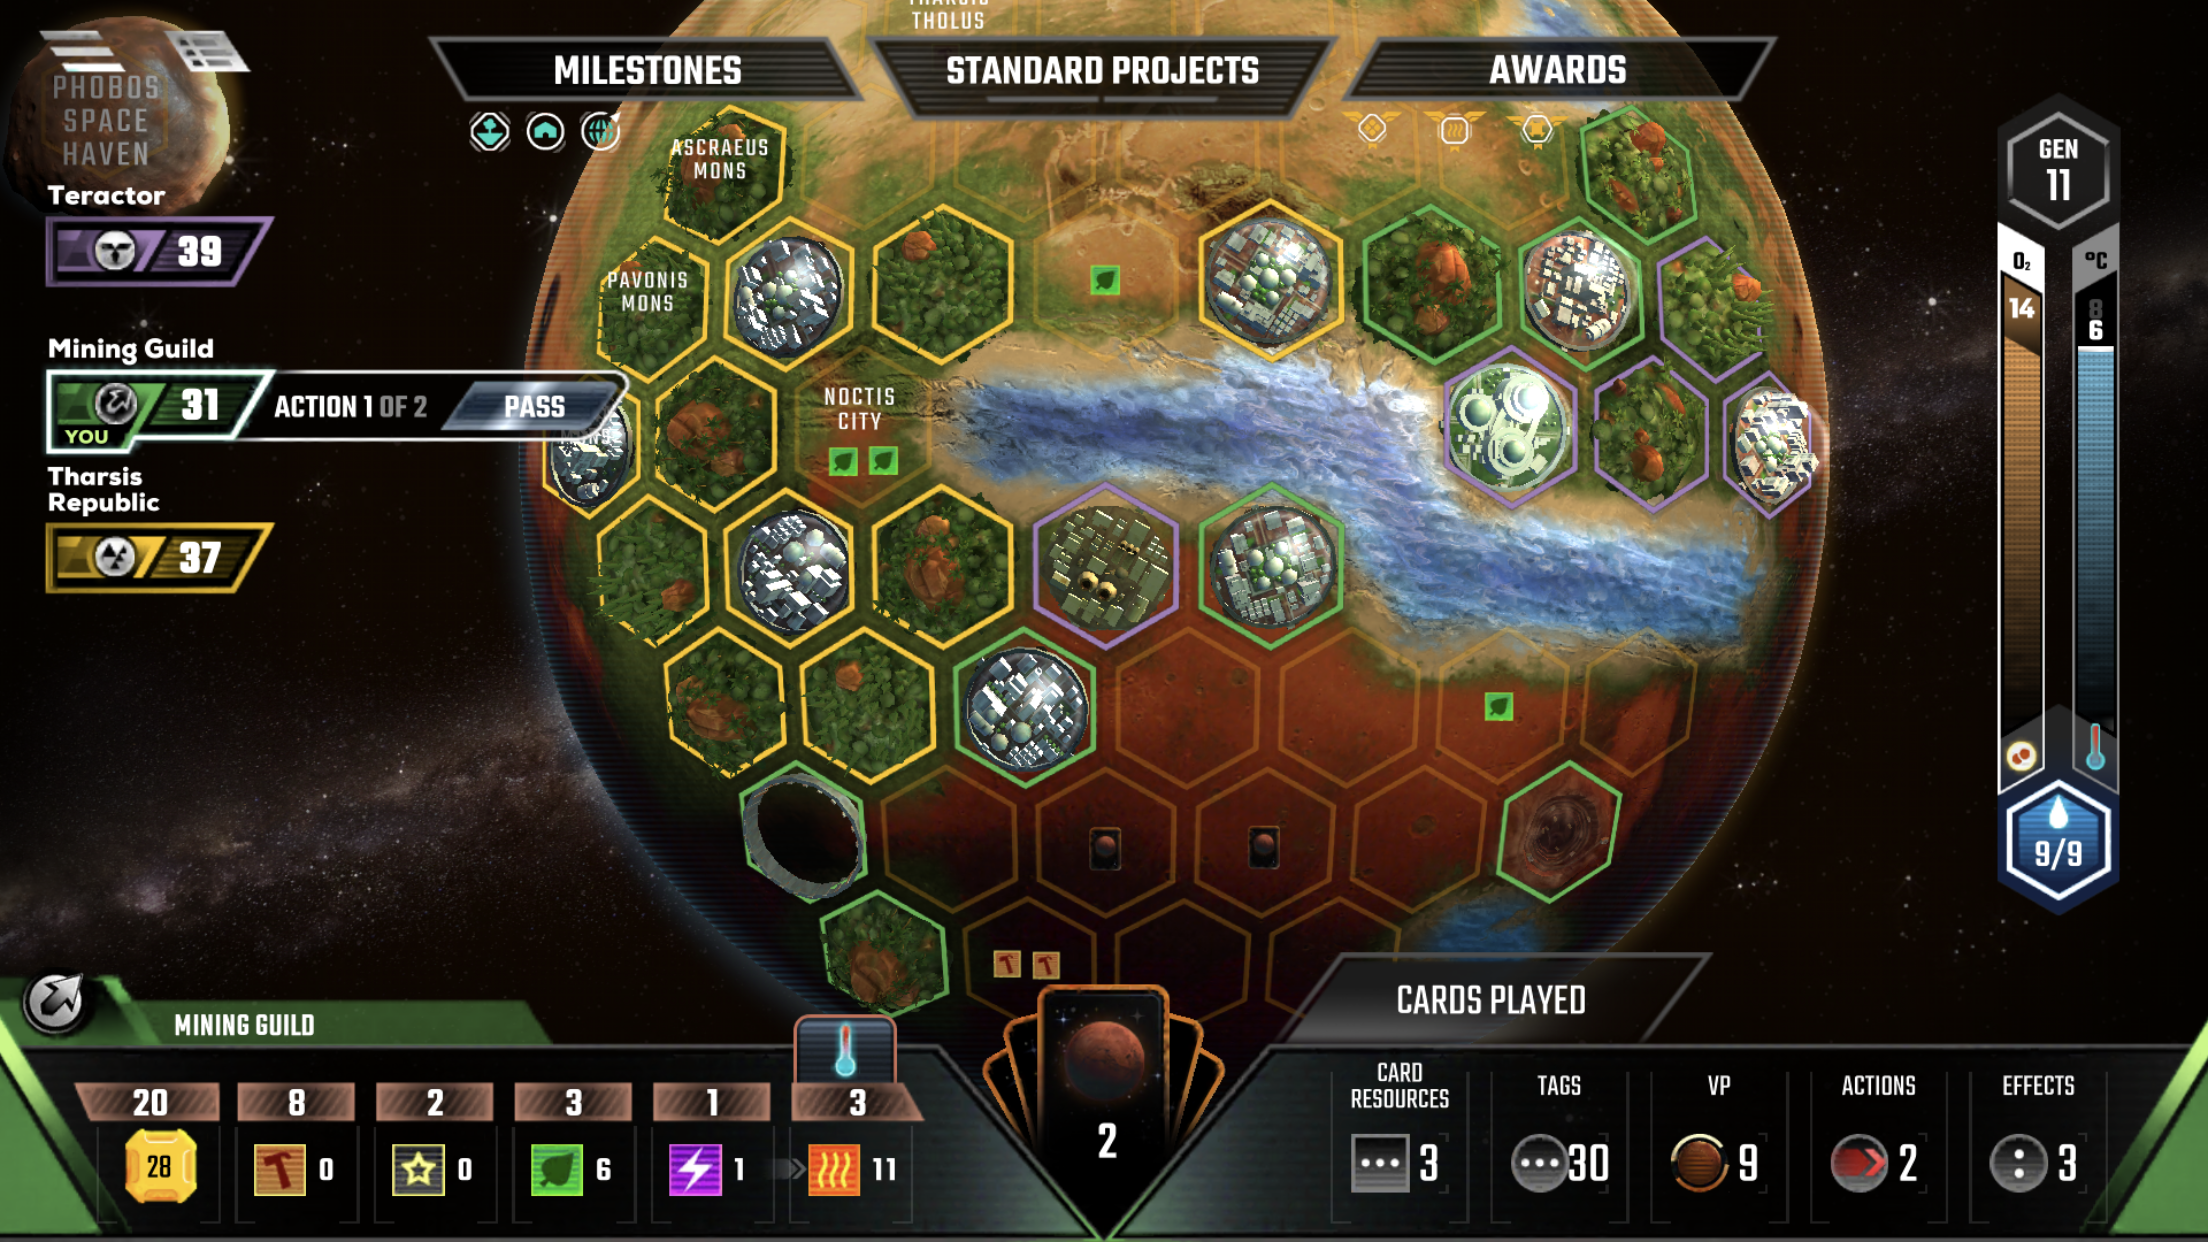 Terraforming Mars' Review: Boardgame App That is Out of This World